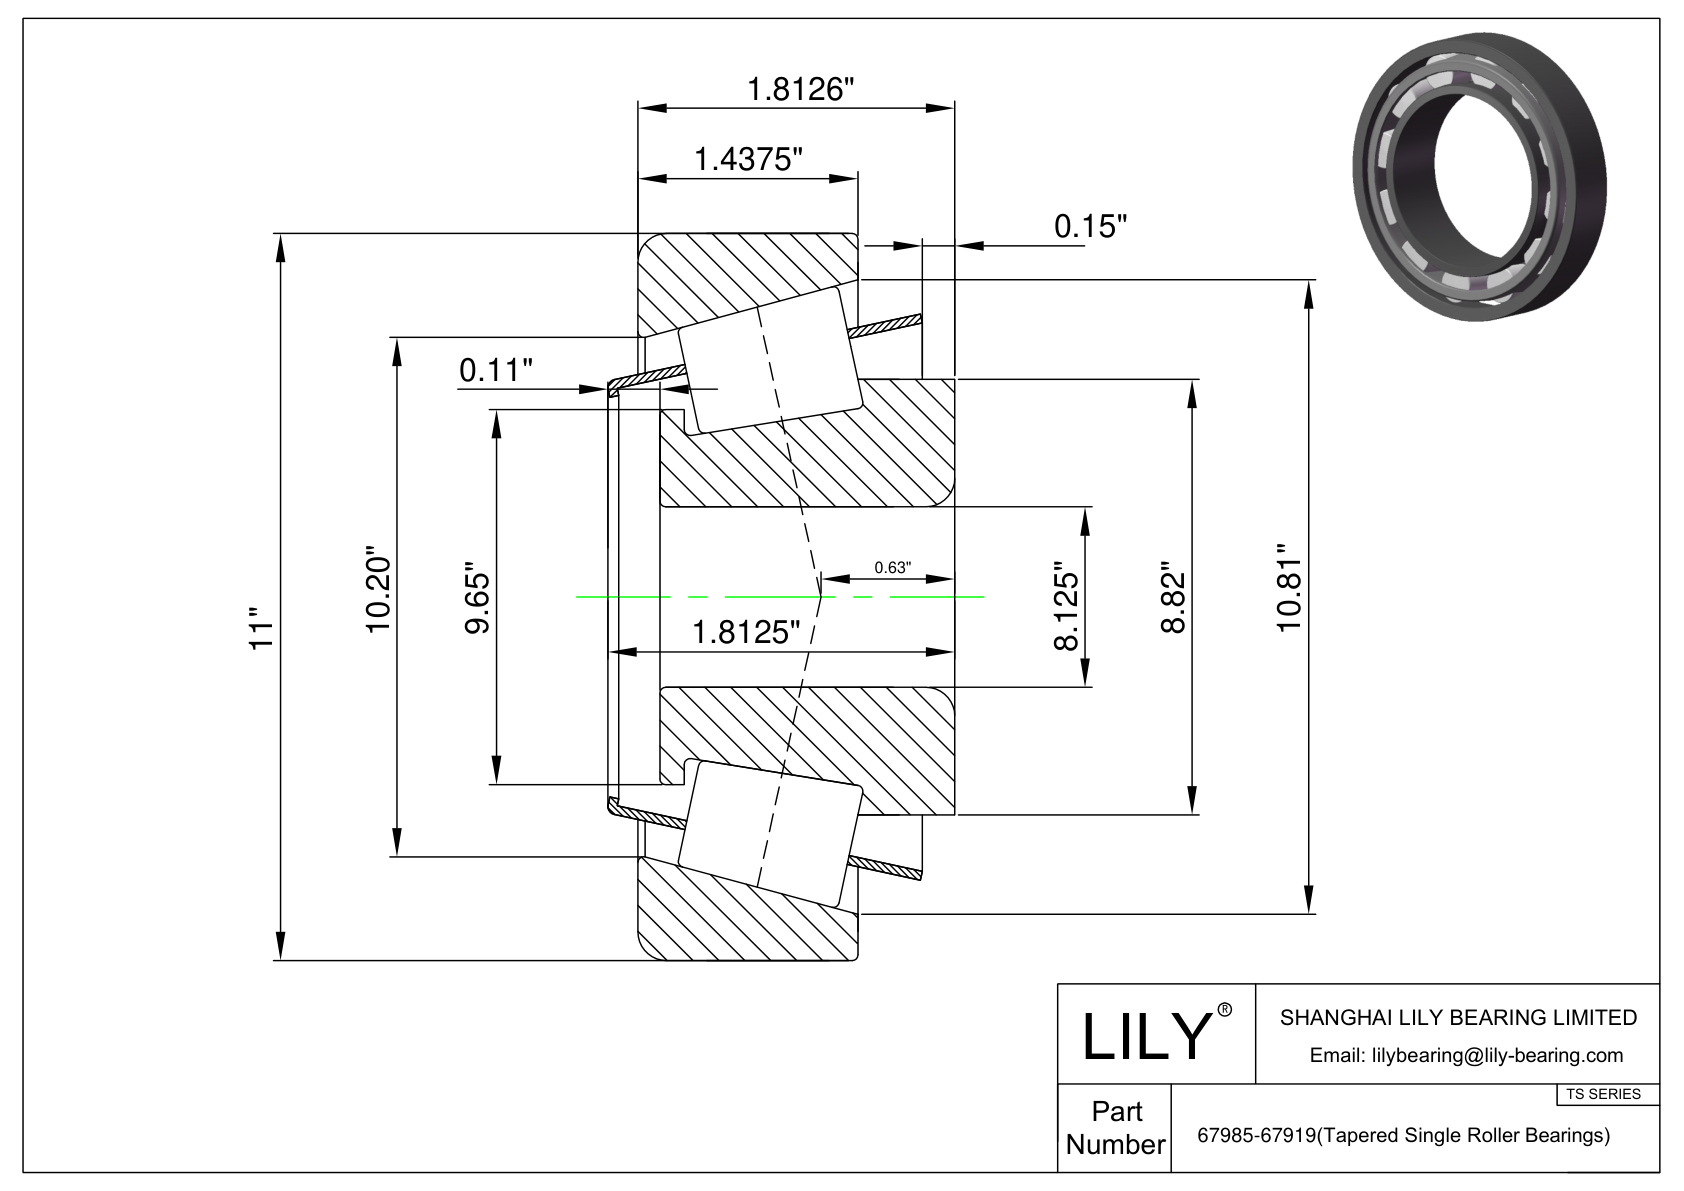 67985-67919 TS (Tapered Single Roller Bearings) (Imperial) cad drawing